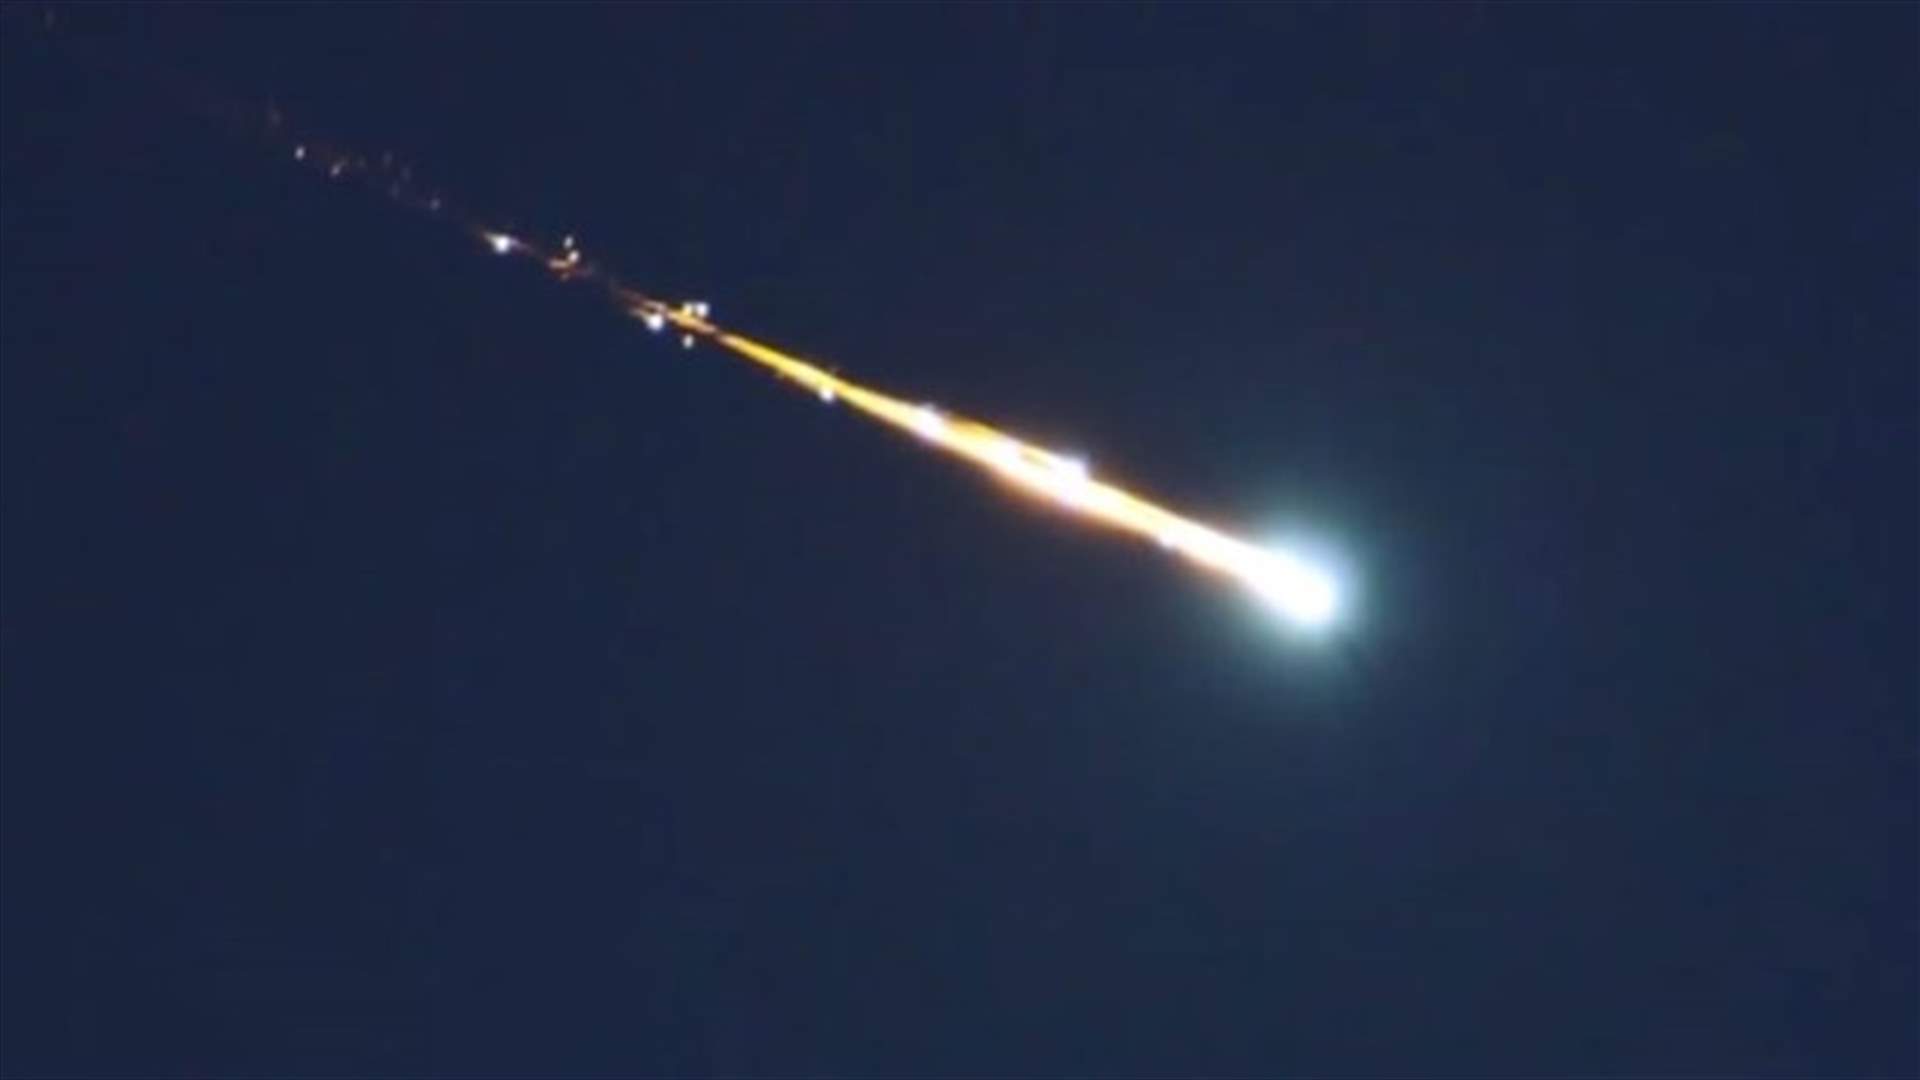 Meteorite whizzes past Cyprus and explodes, lighting up night sky